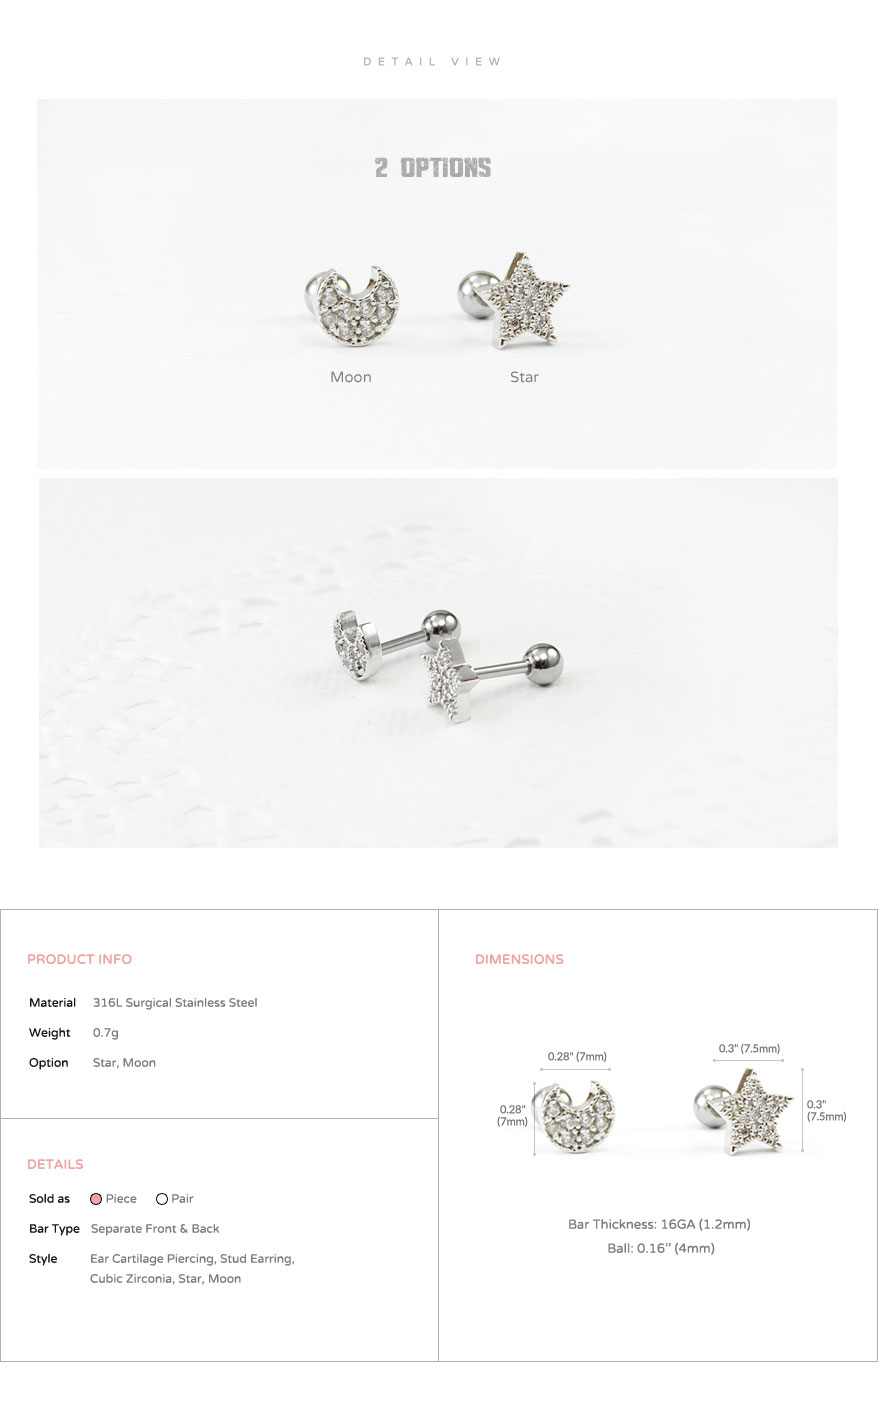 ear_studs_piercing_Cartilage_earrings_16g_316l_Surgical_Stainless_Steel_korean_asian_style_jewelry_barbell_cubic_zirconia_star_moon_5